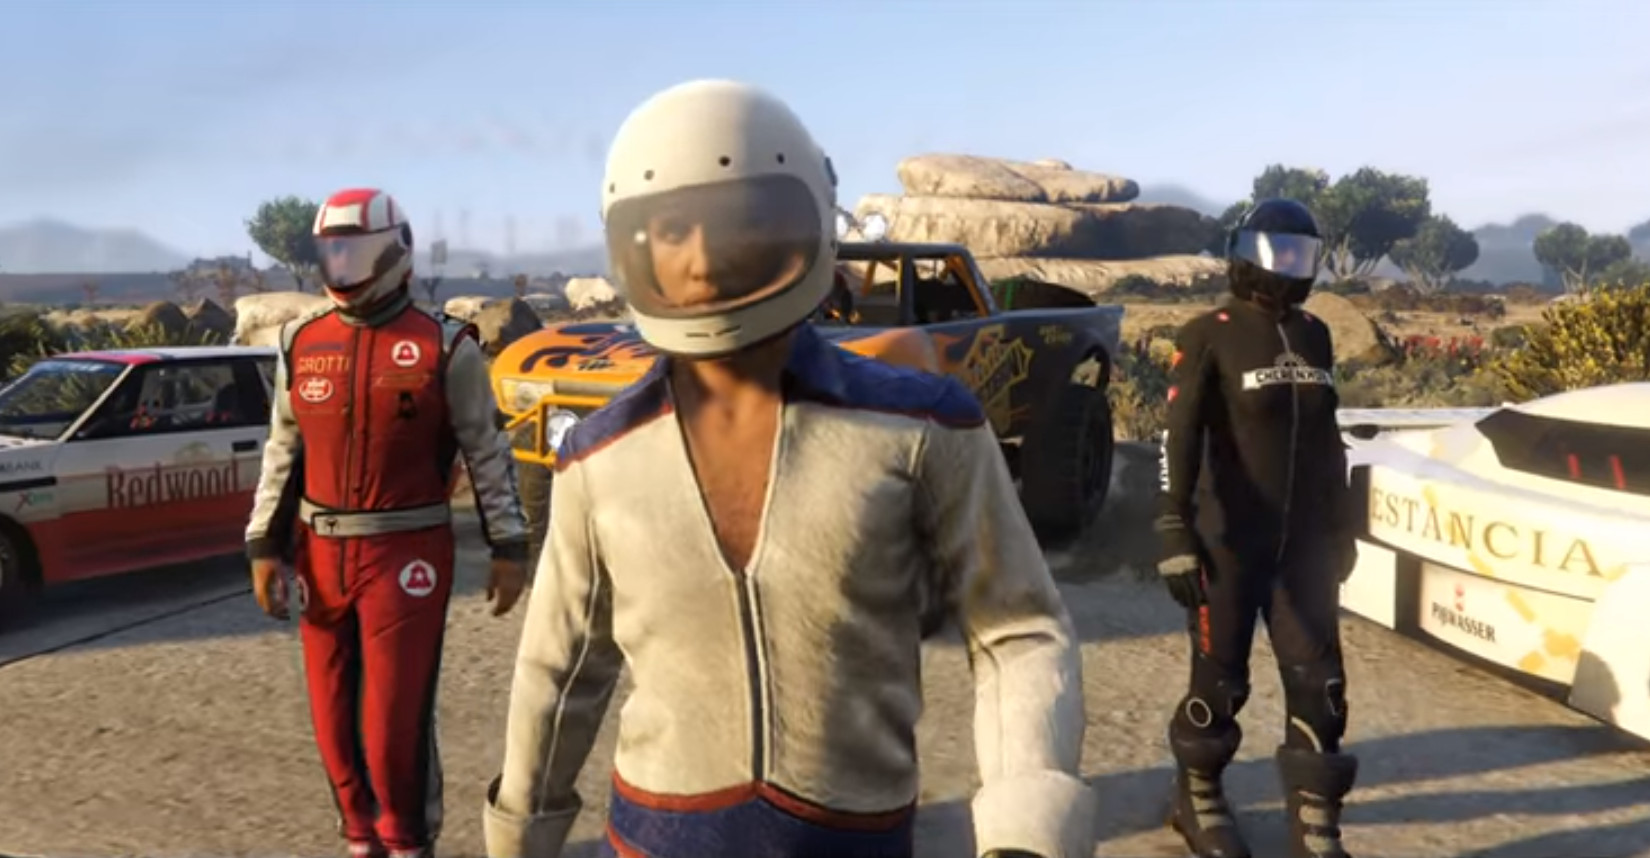 New Stunt Races and Vehicles Added to GTA Online: Cunning Stunts